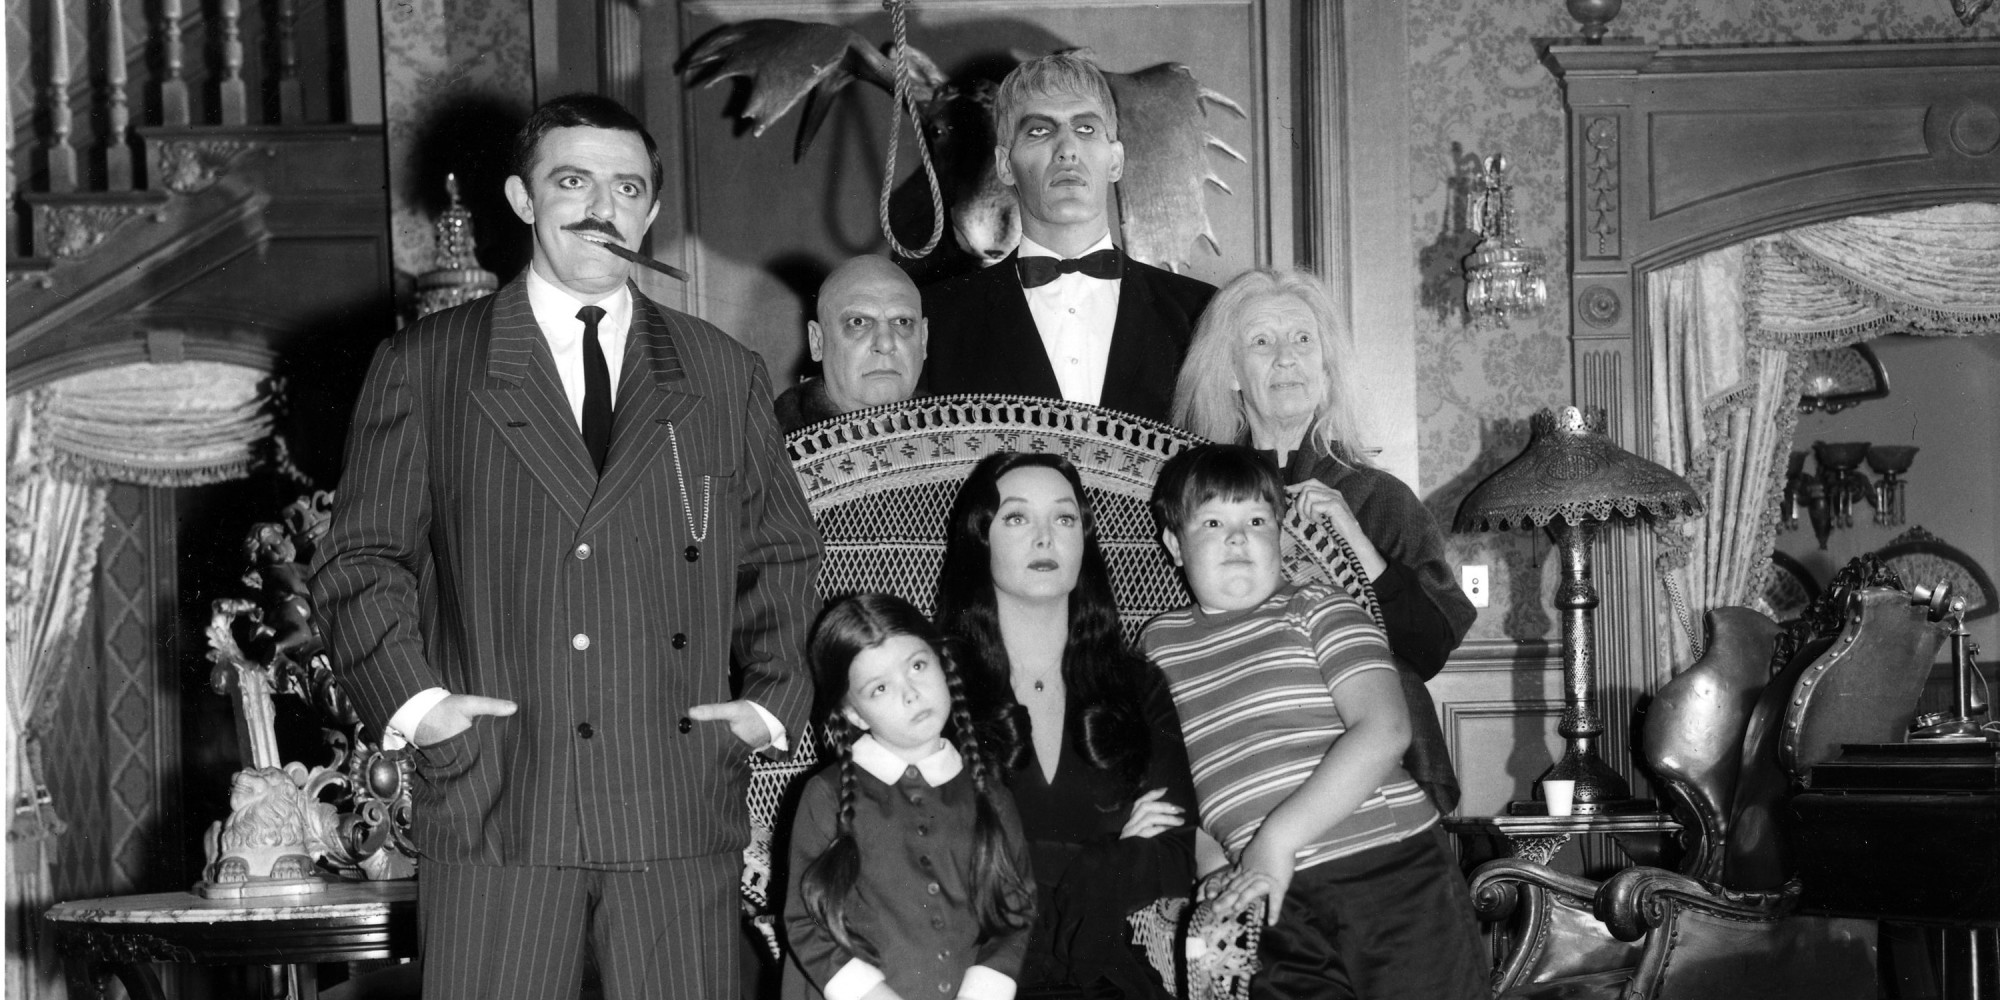 addams family wallpaper,people,monochrome,classic,family,event